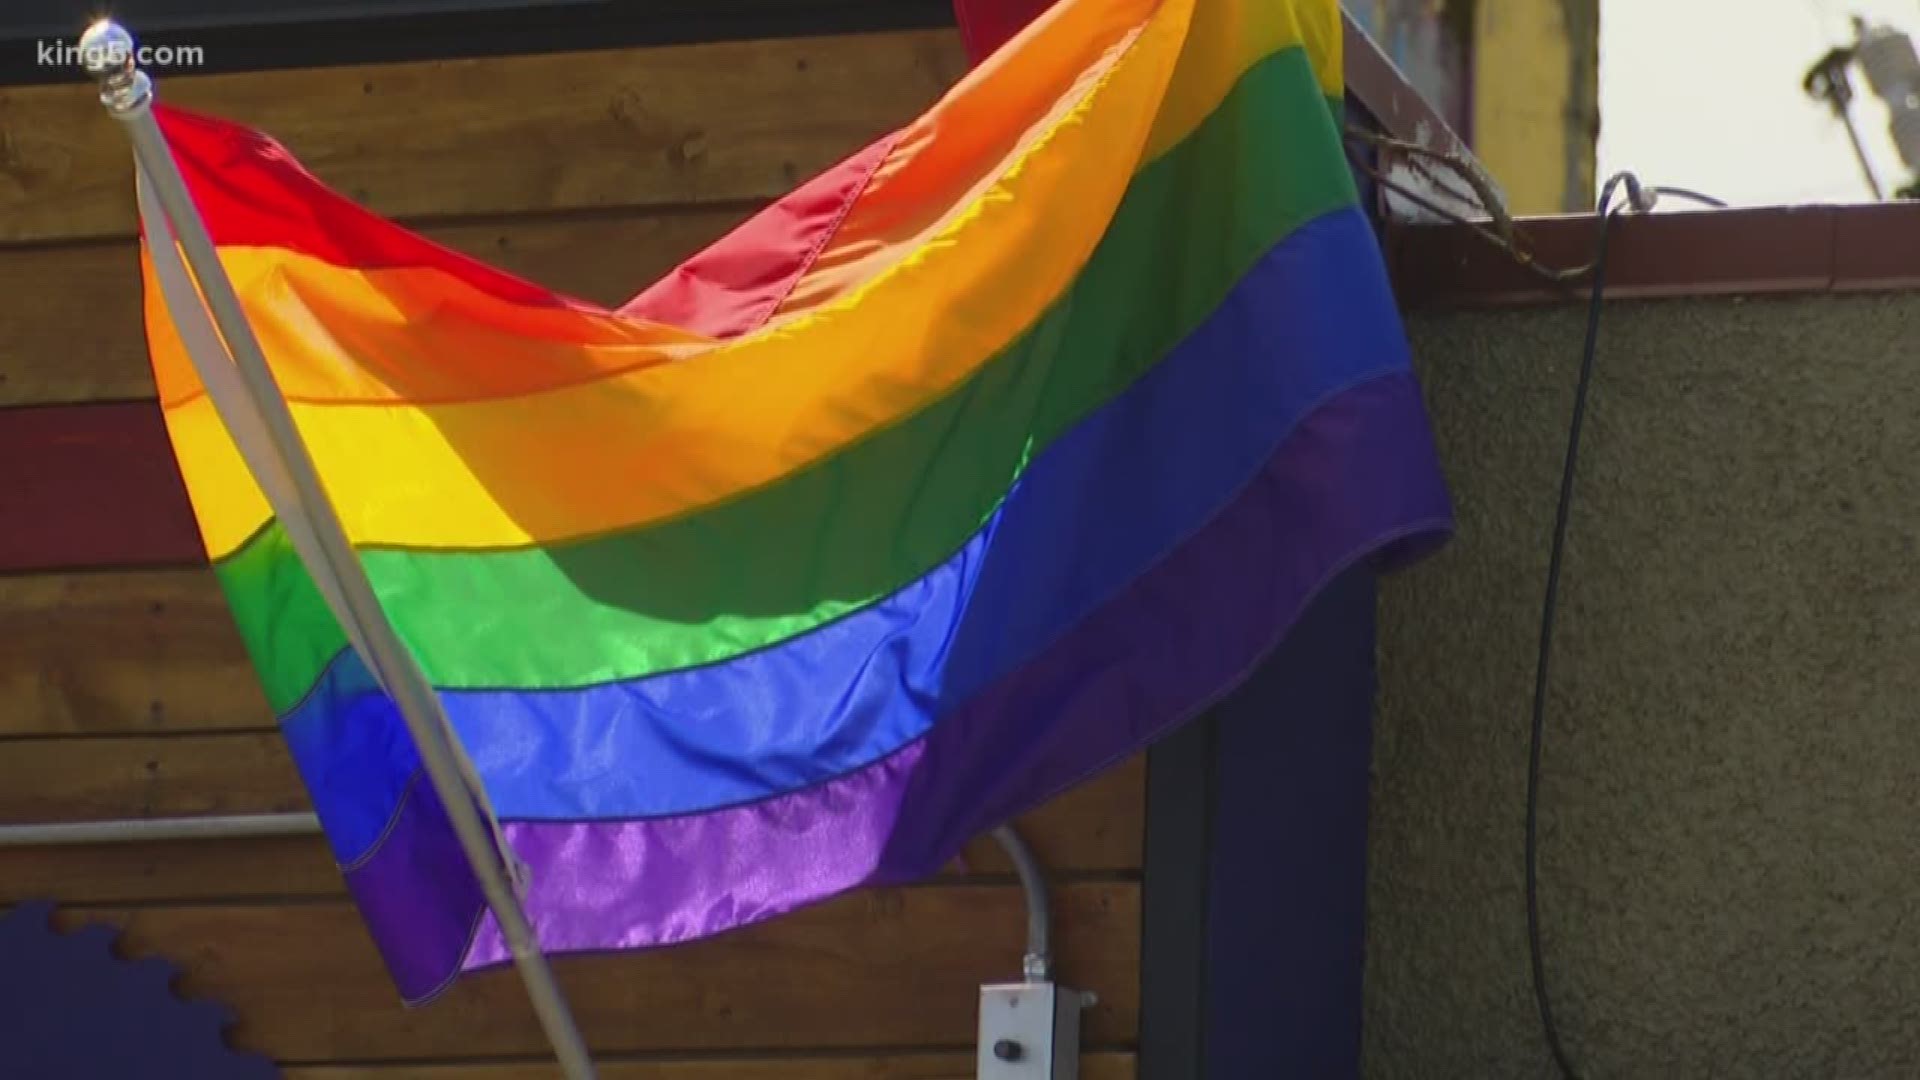 White Center is preparing for its first Pride celebration. Events are being planned by local businesses. KING 5's Kalie Greenberg explains what this means for the neighborhood.